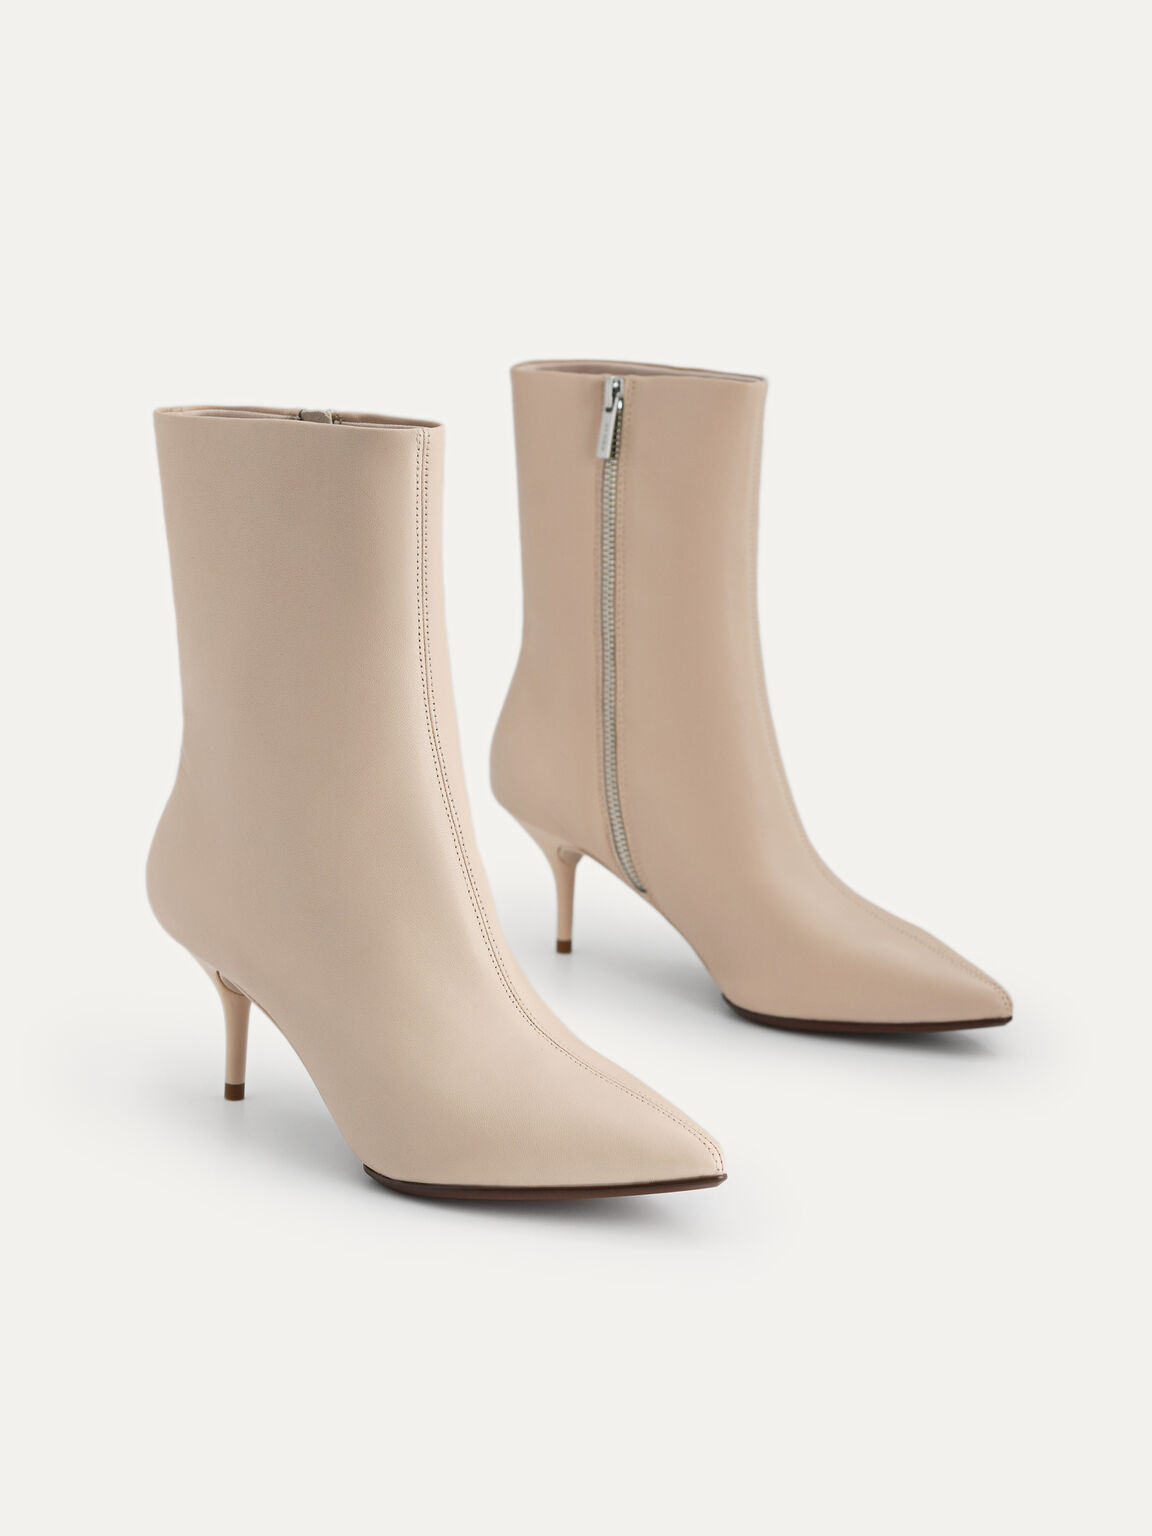 Leather Ankle Boots, Beige